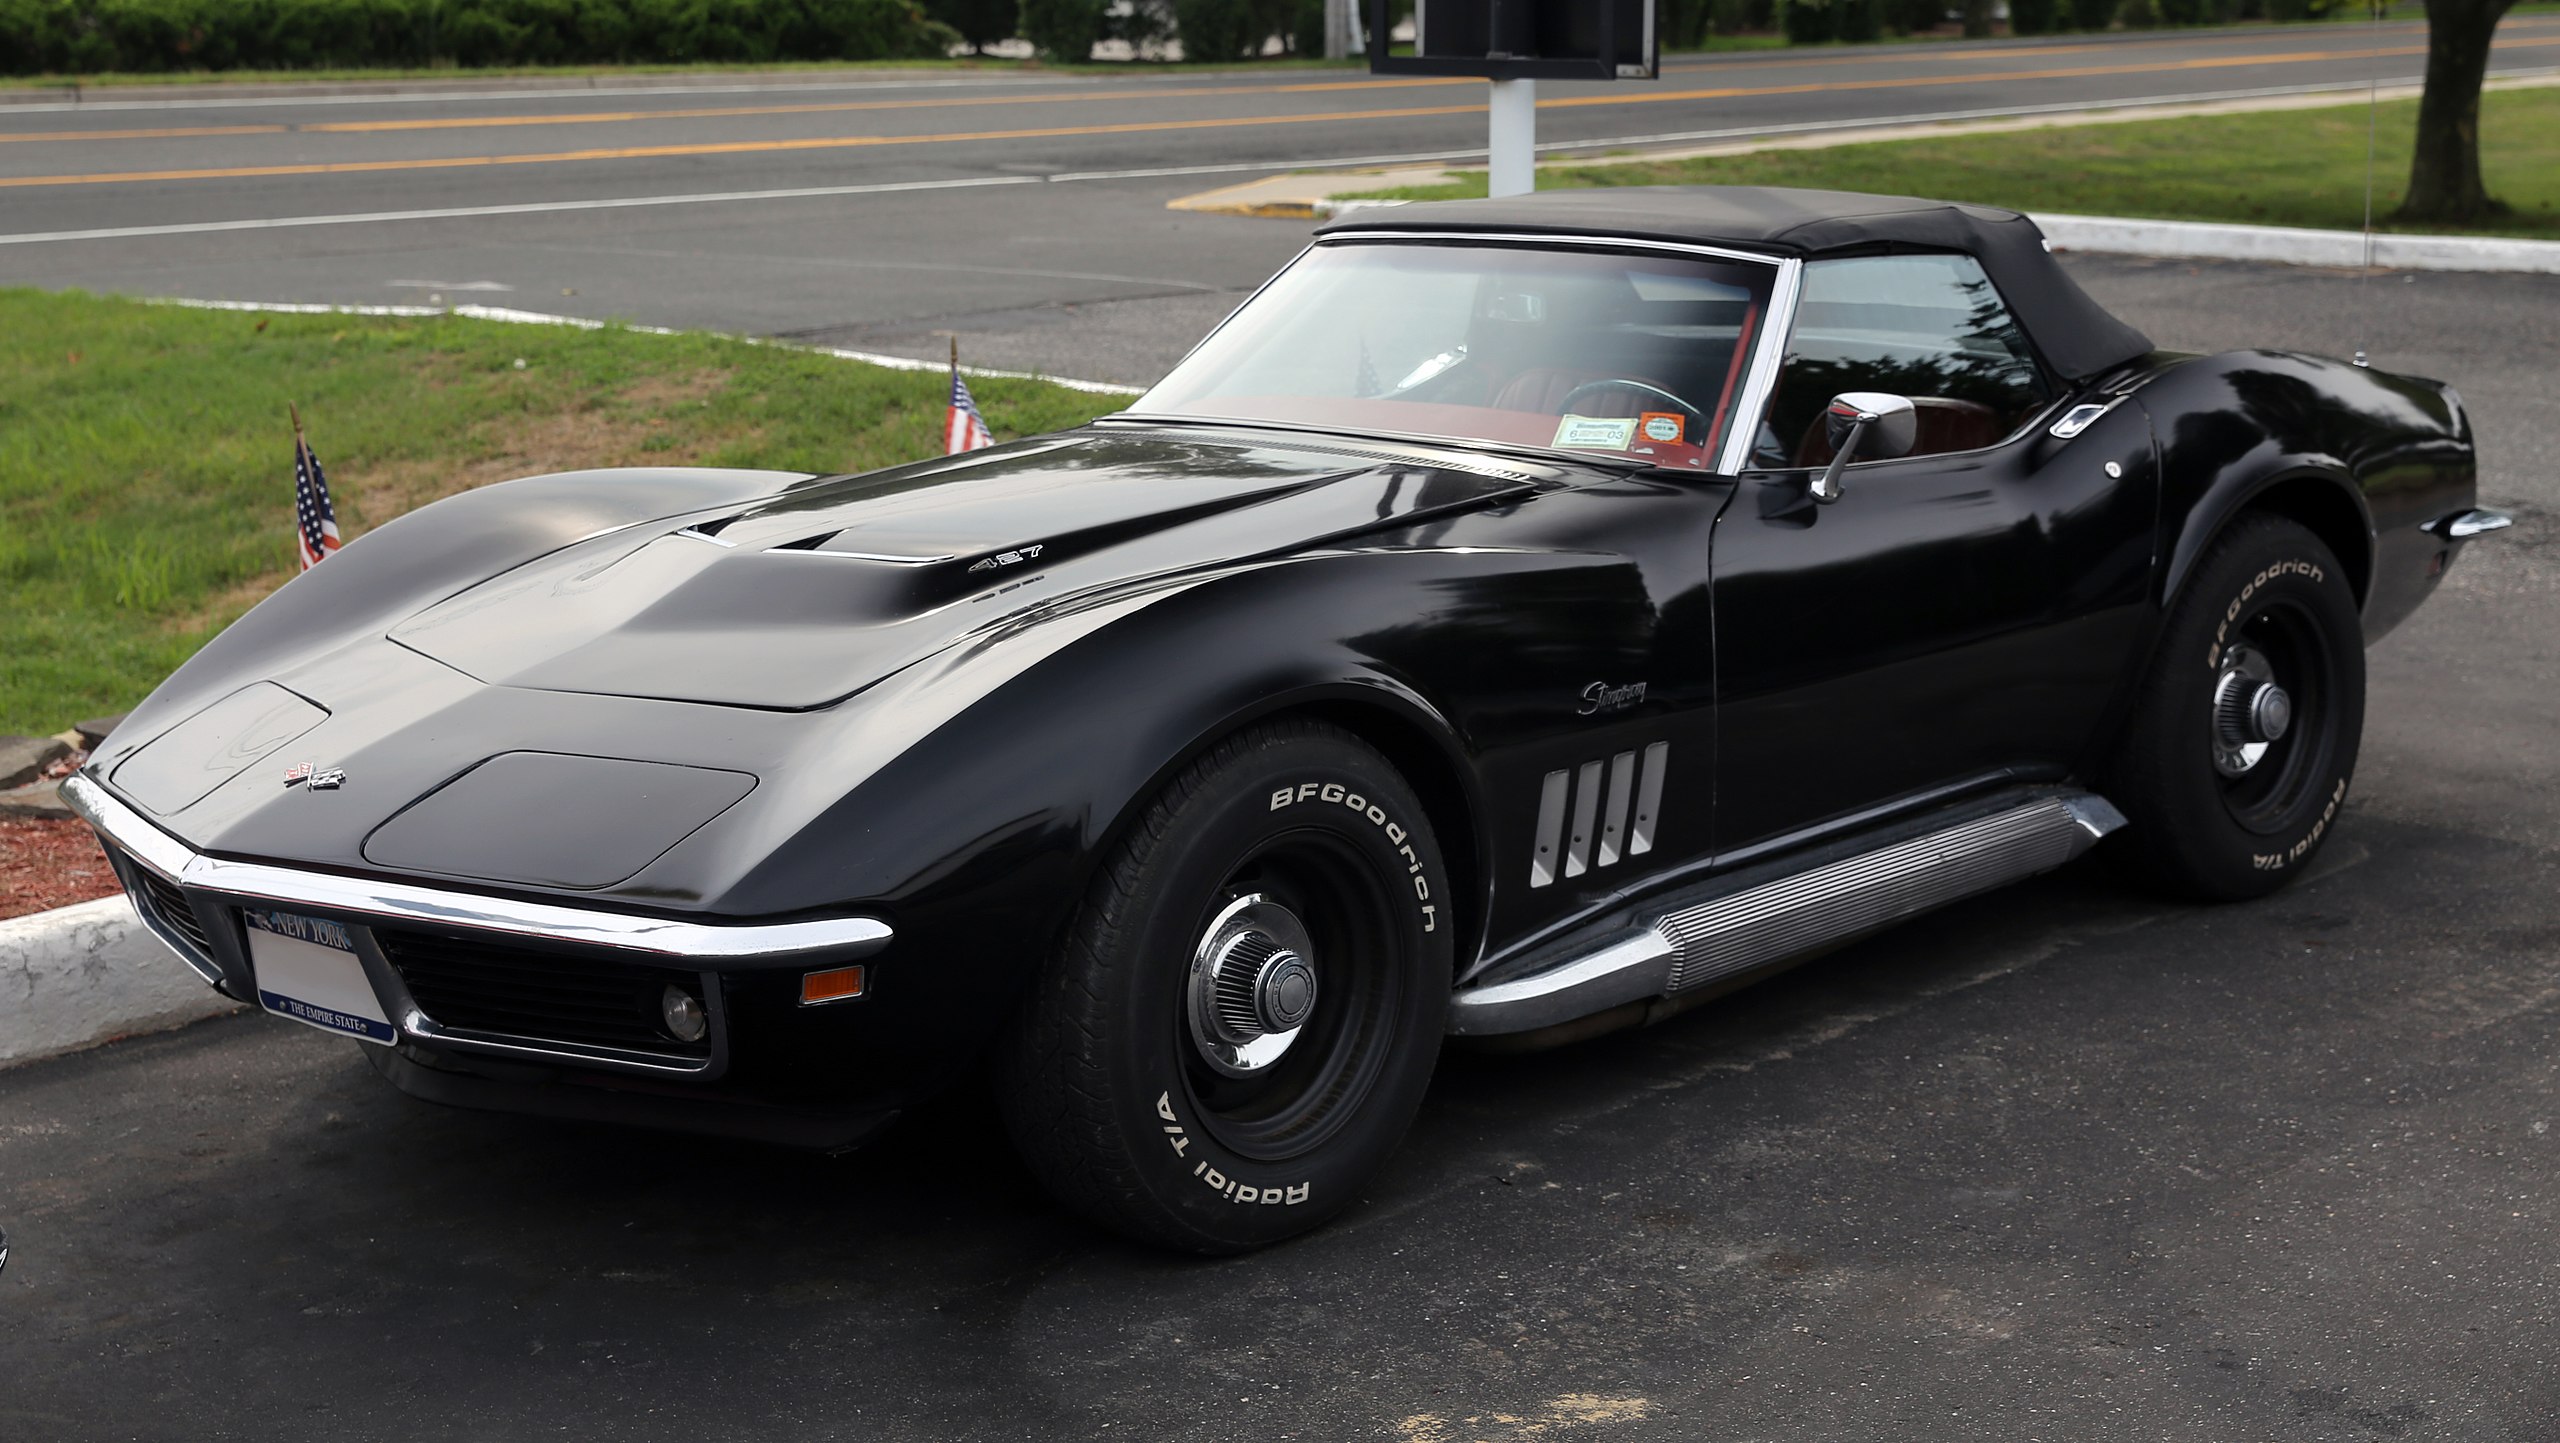 1969 Chevy Corvette Stingray Convertible all black with street in background